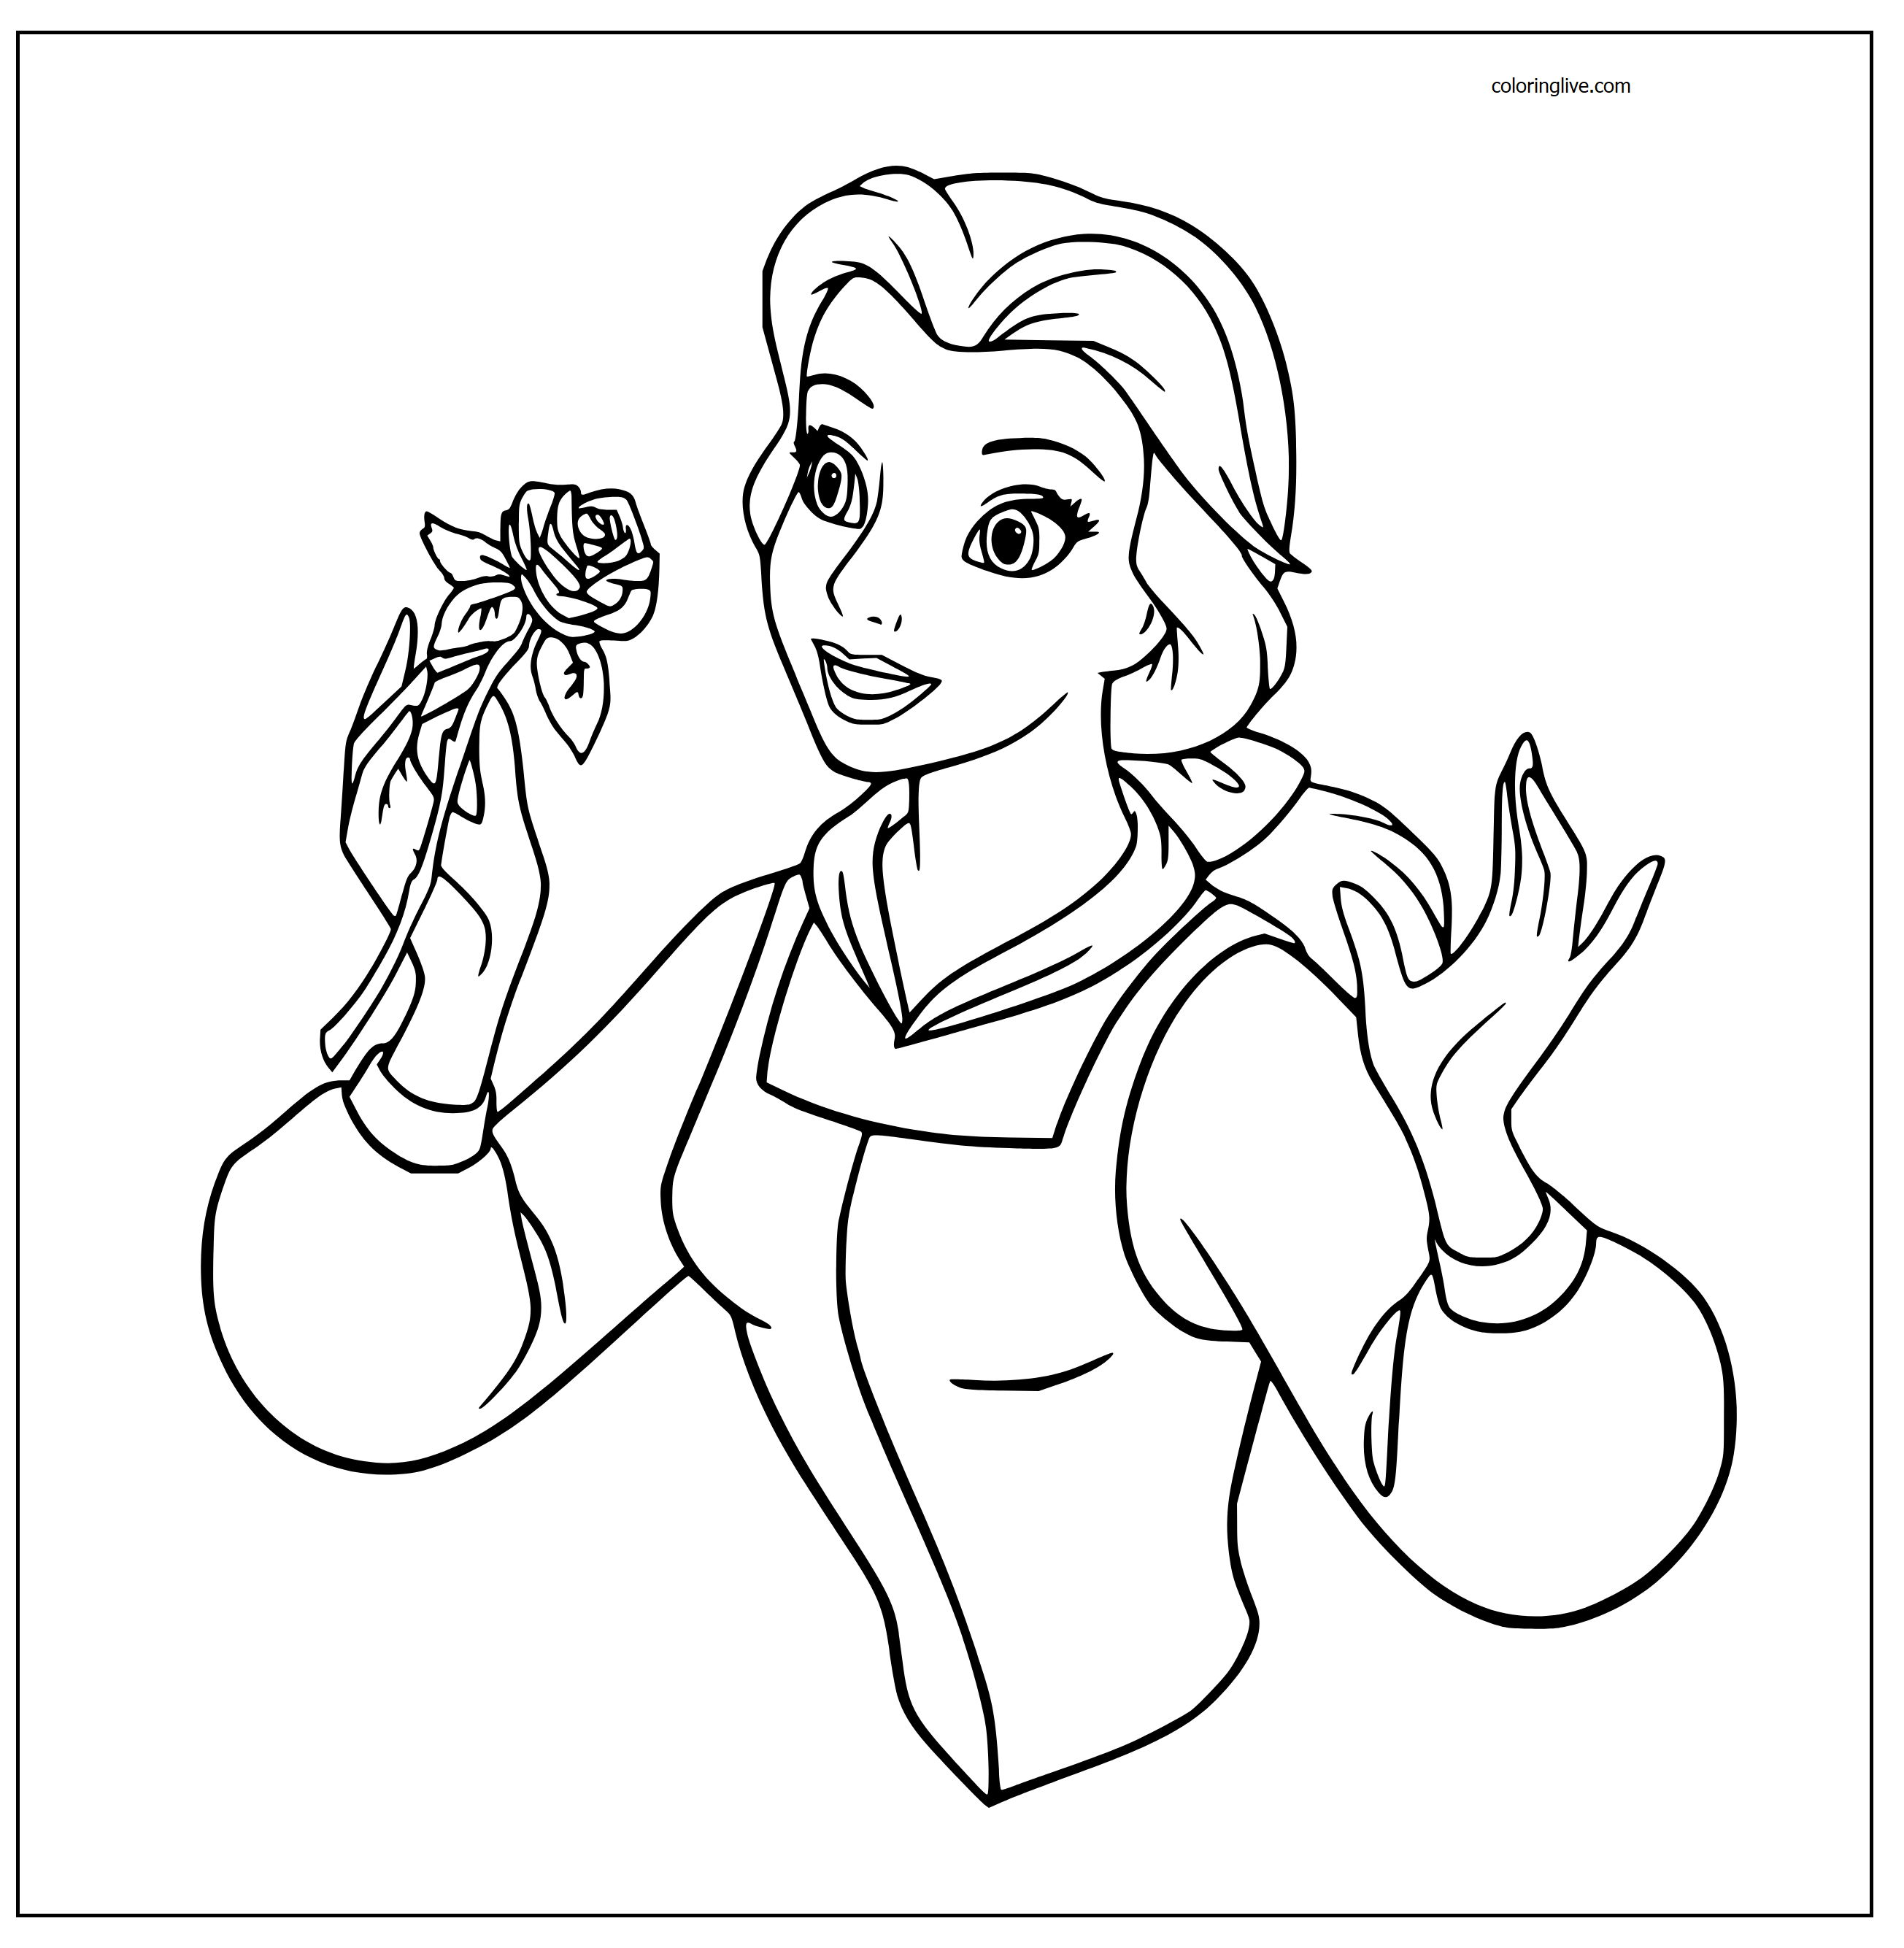 Printable Beauty and the Beast   9 Coloring Page for kids.